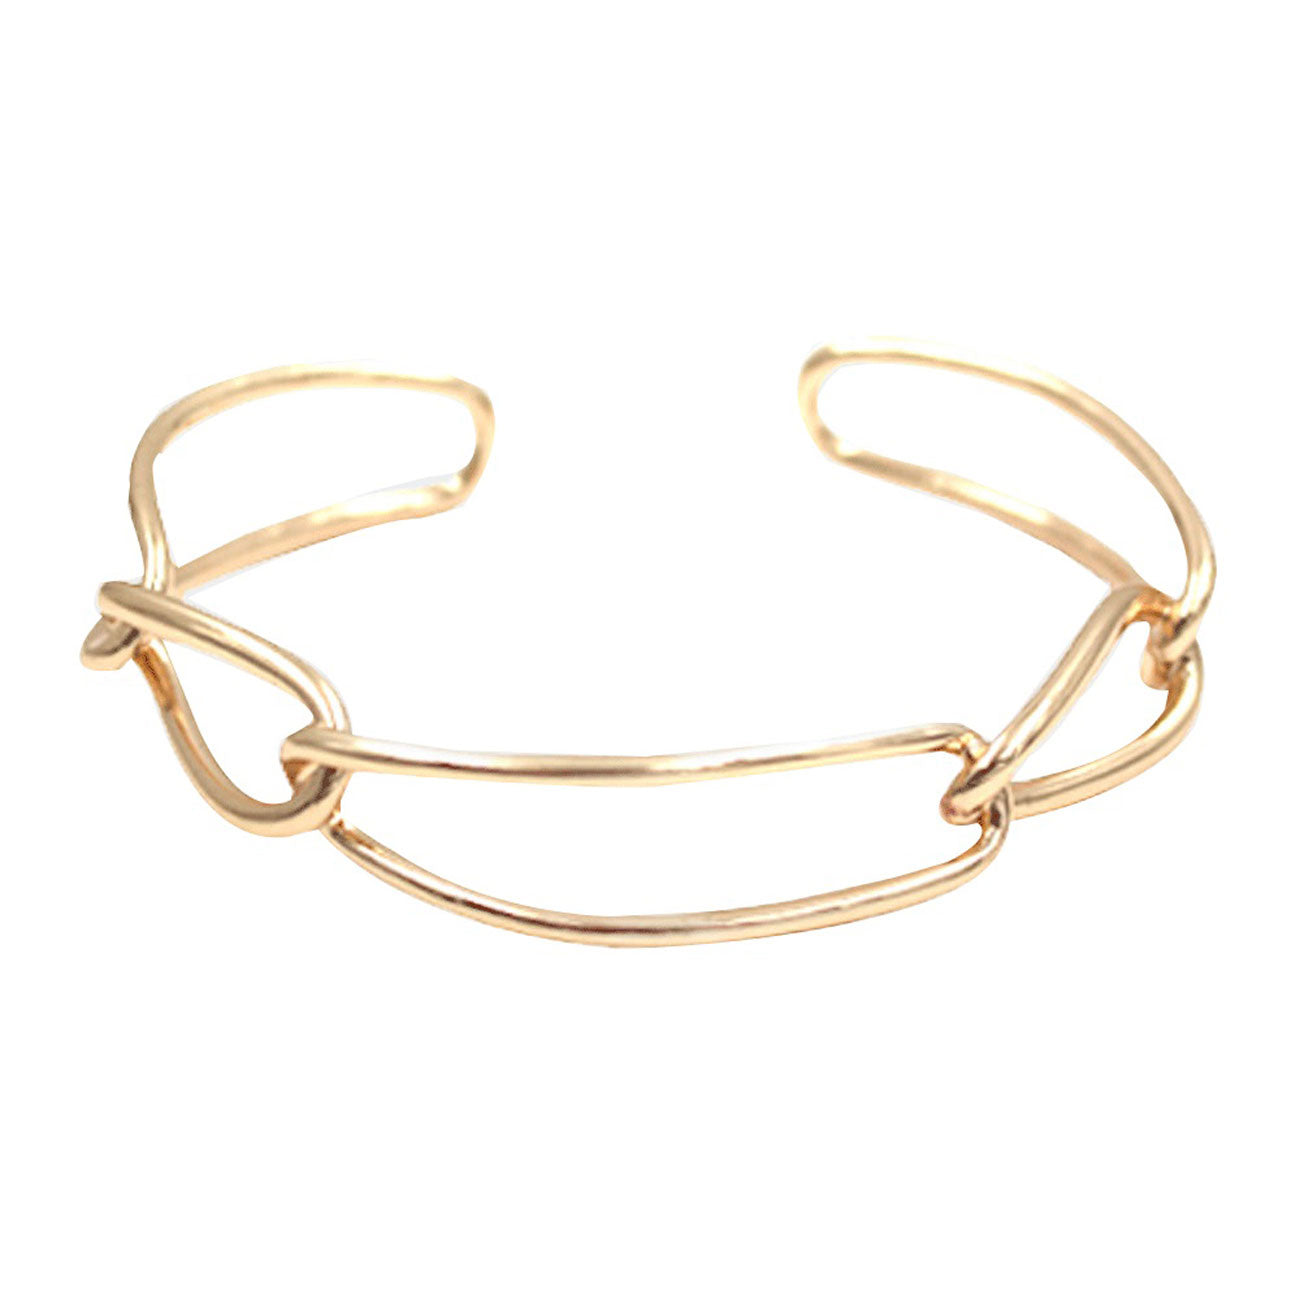 Gold Brass Open Metal Link Cuff Bracelet, put on a pop of color to complete your ensemble. Perfect for adding just the right amount of shimmer & shine and a touch of class to special events. Perfect Birthday Gift, Valentine's Gift, Anniversary Gift, Mother's Day Gift, Graduation Gift.